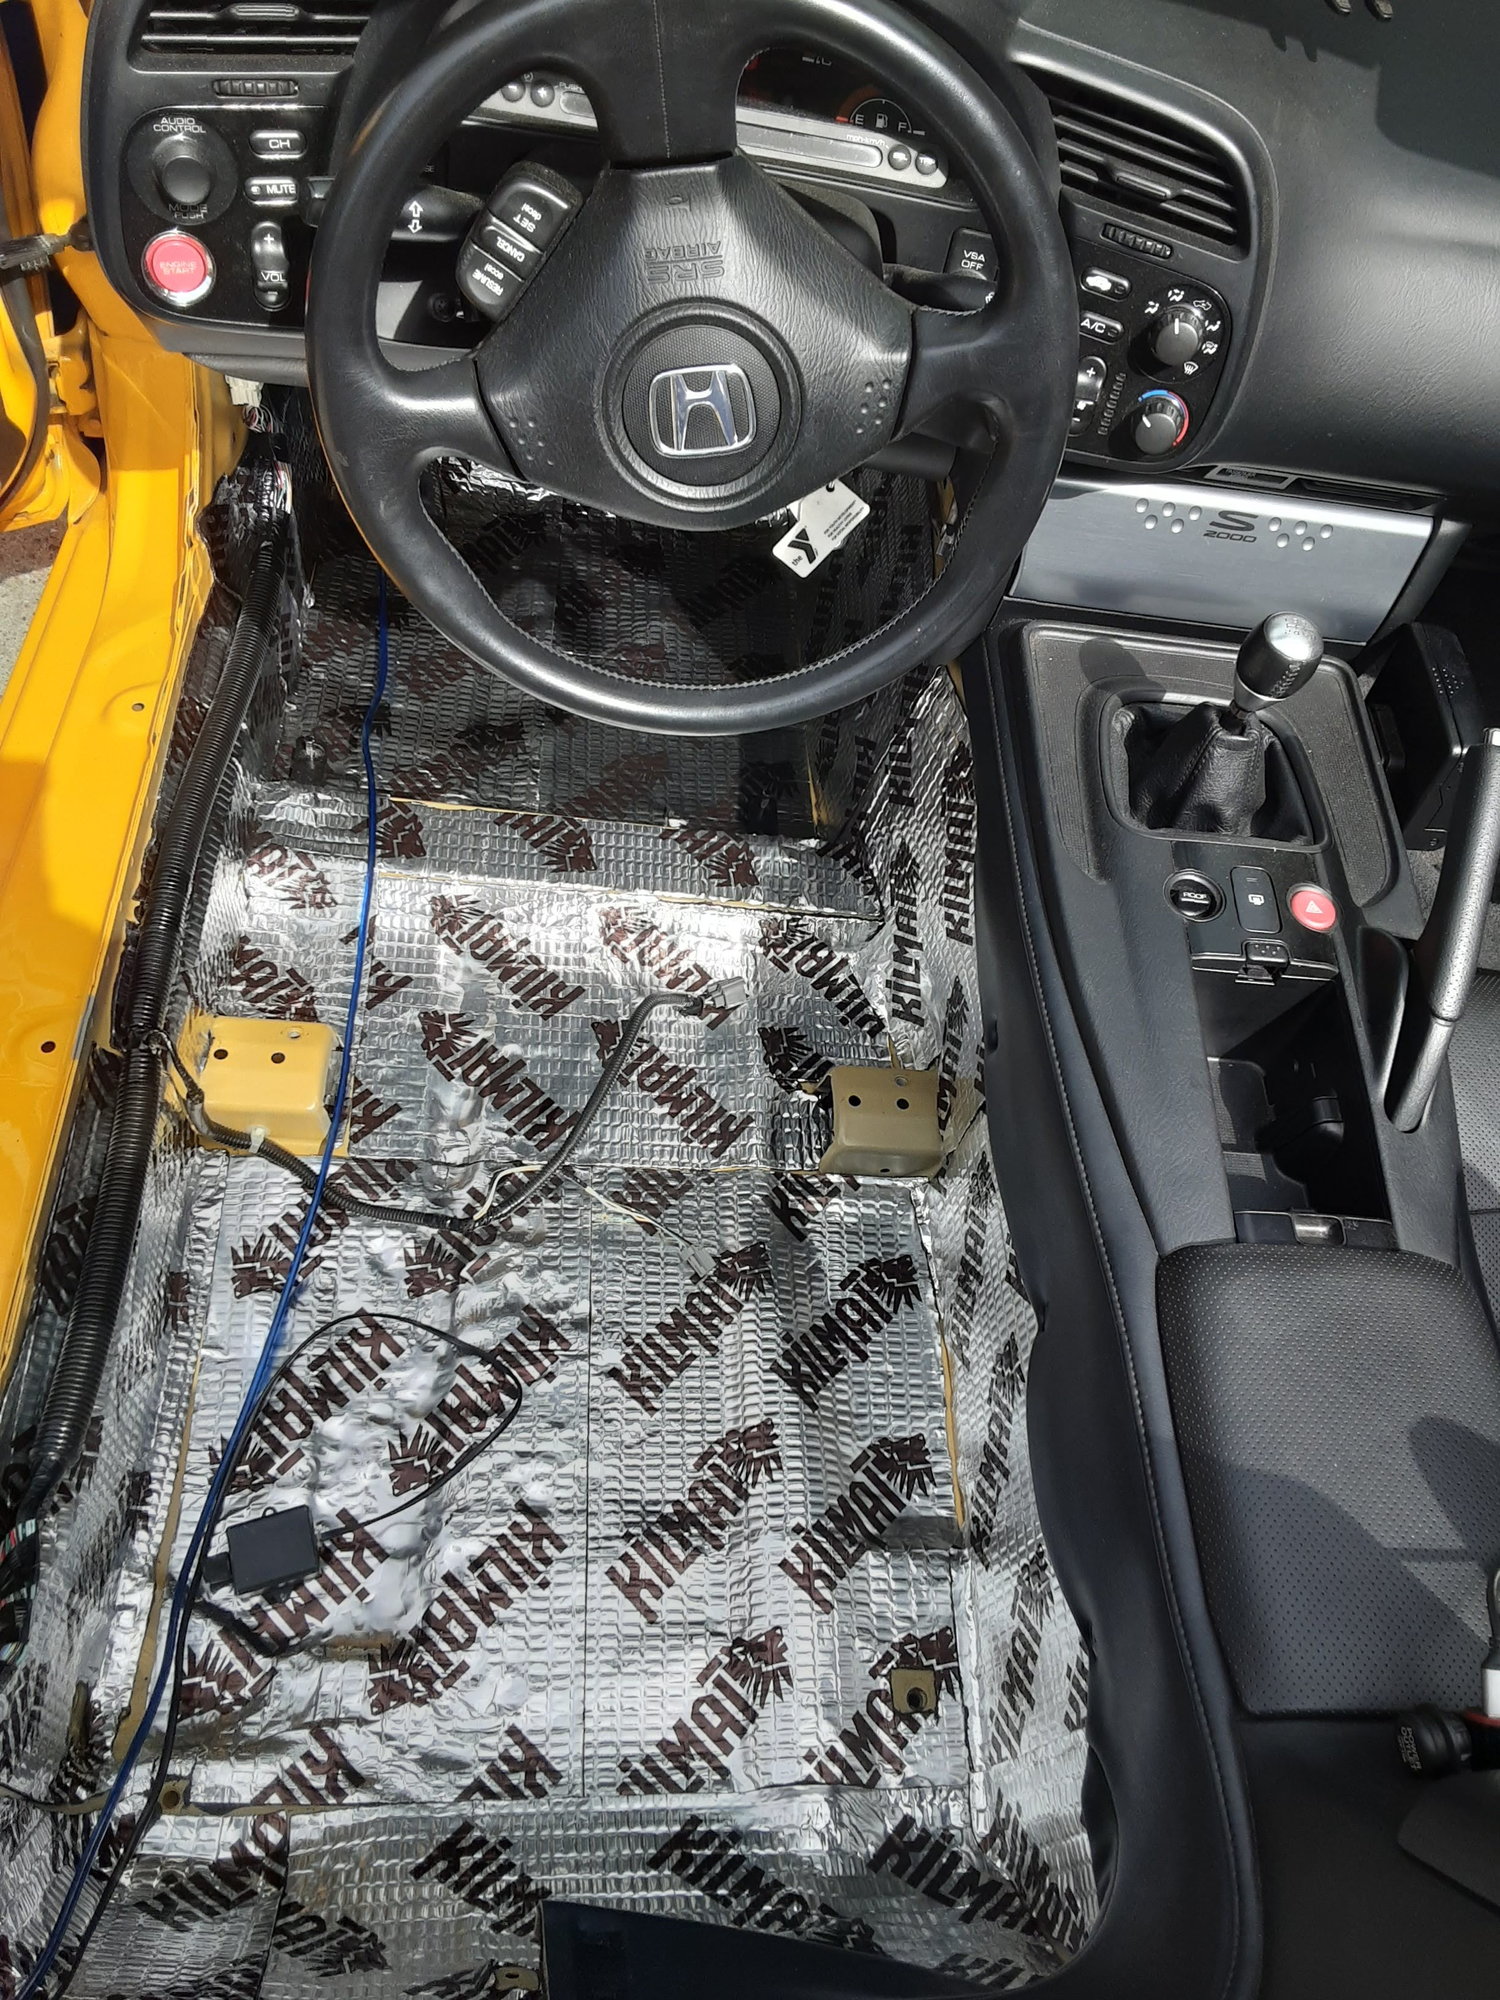 KILMAT Sound Deadening Mat Install Does it ACTUALLY work??? 